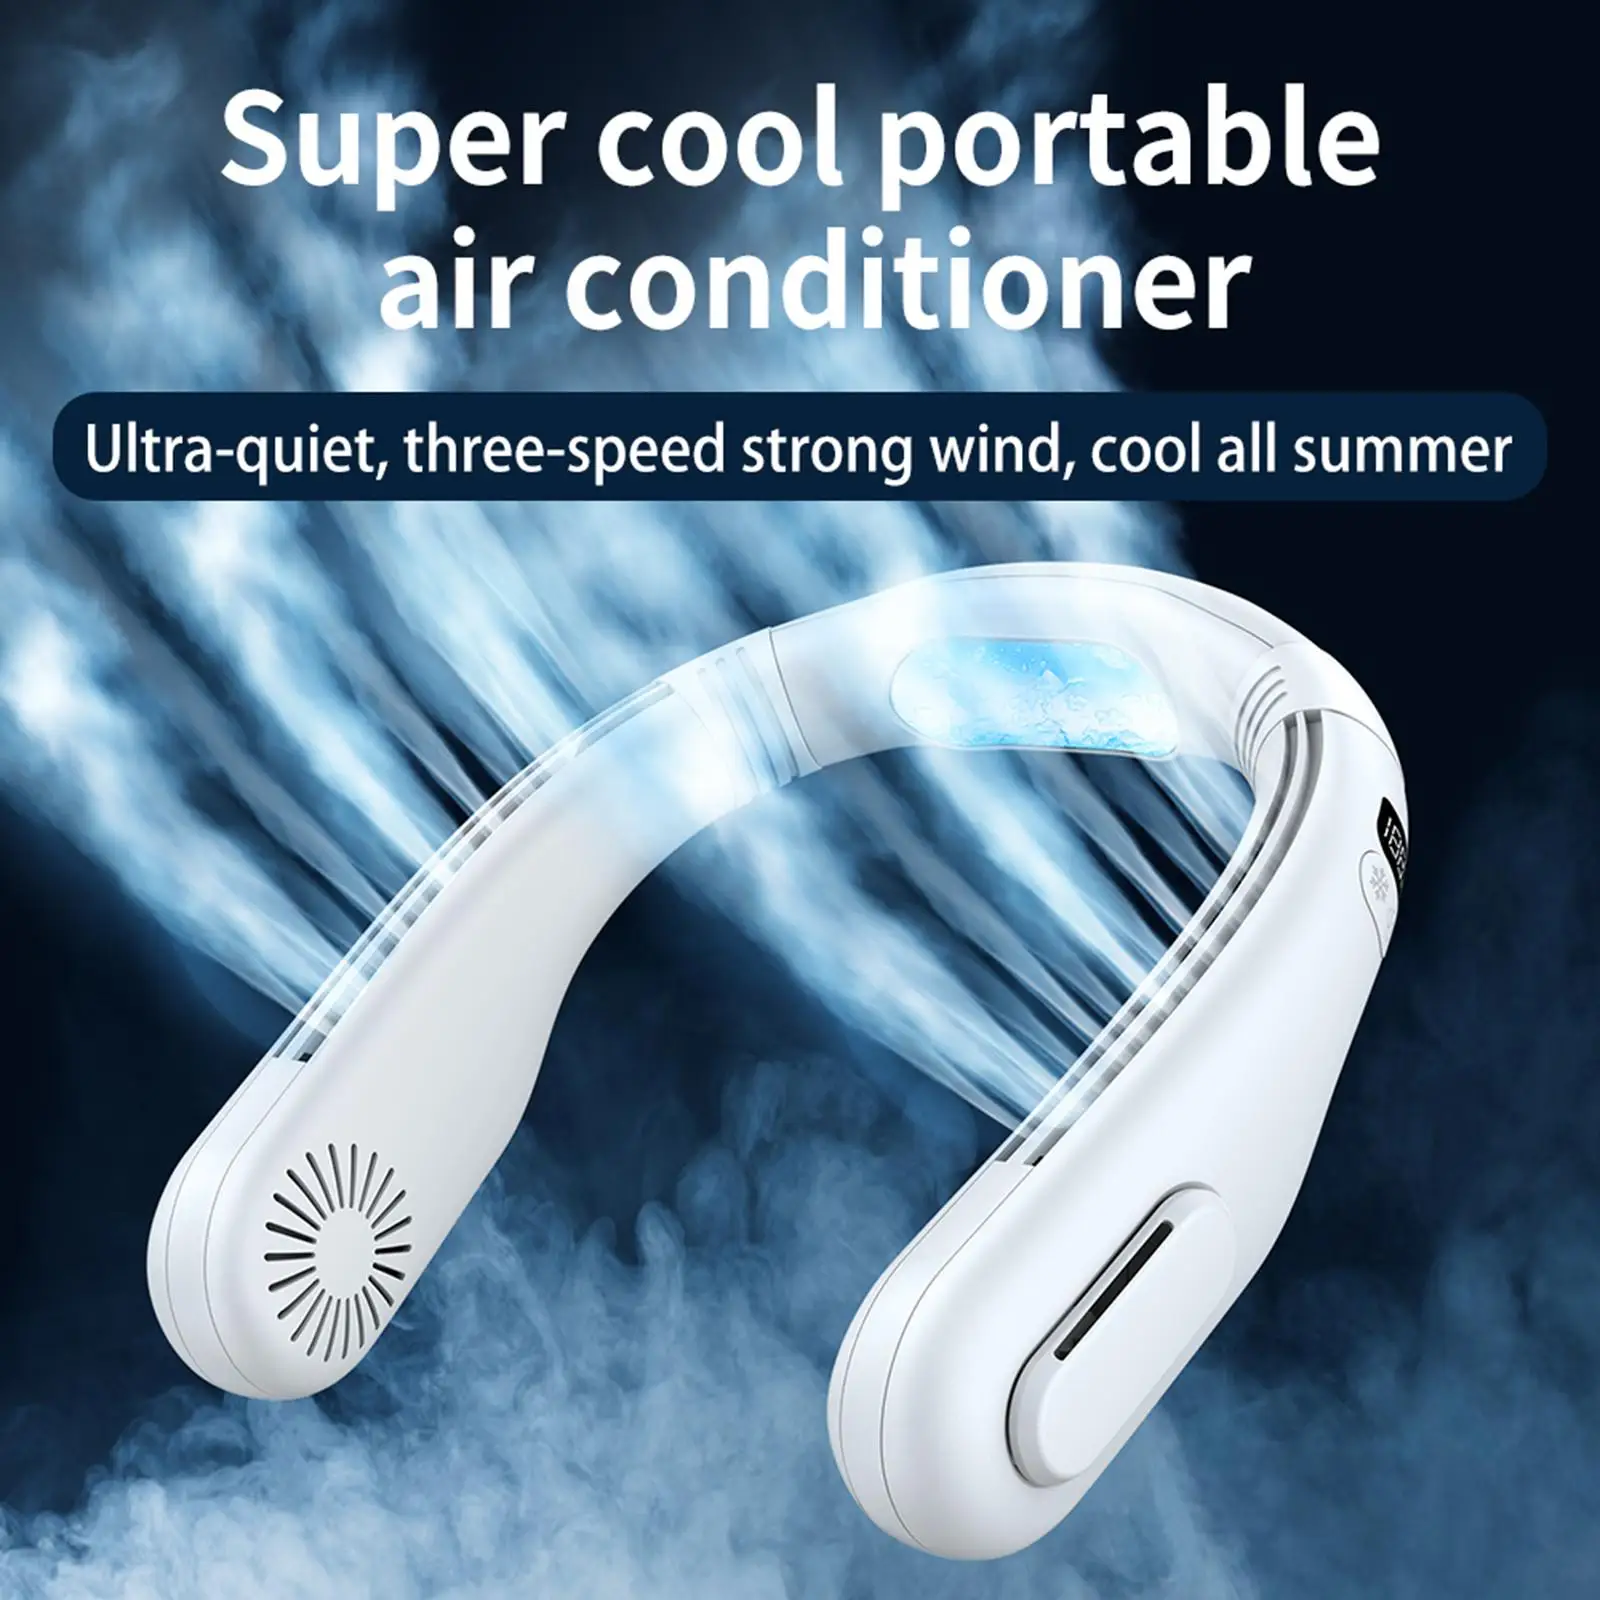 Portable Neck Hanging Fan Hands Free Low Noise 4000mAh 3 Speeds for